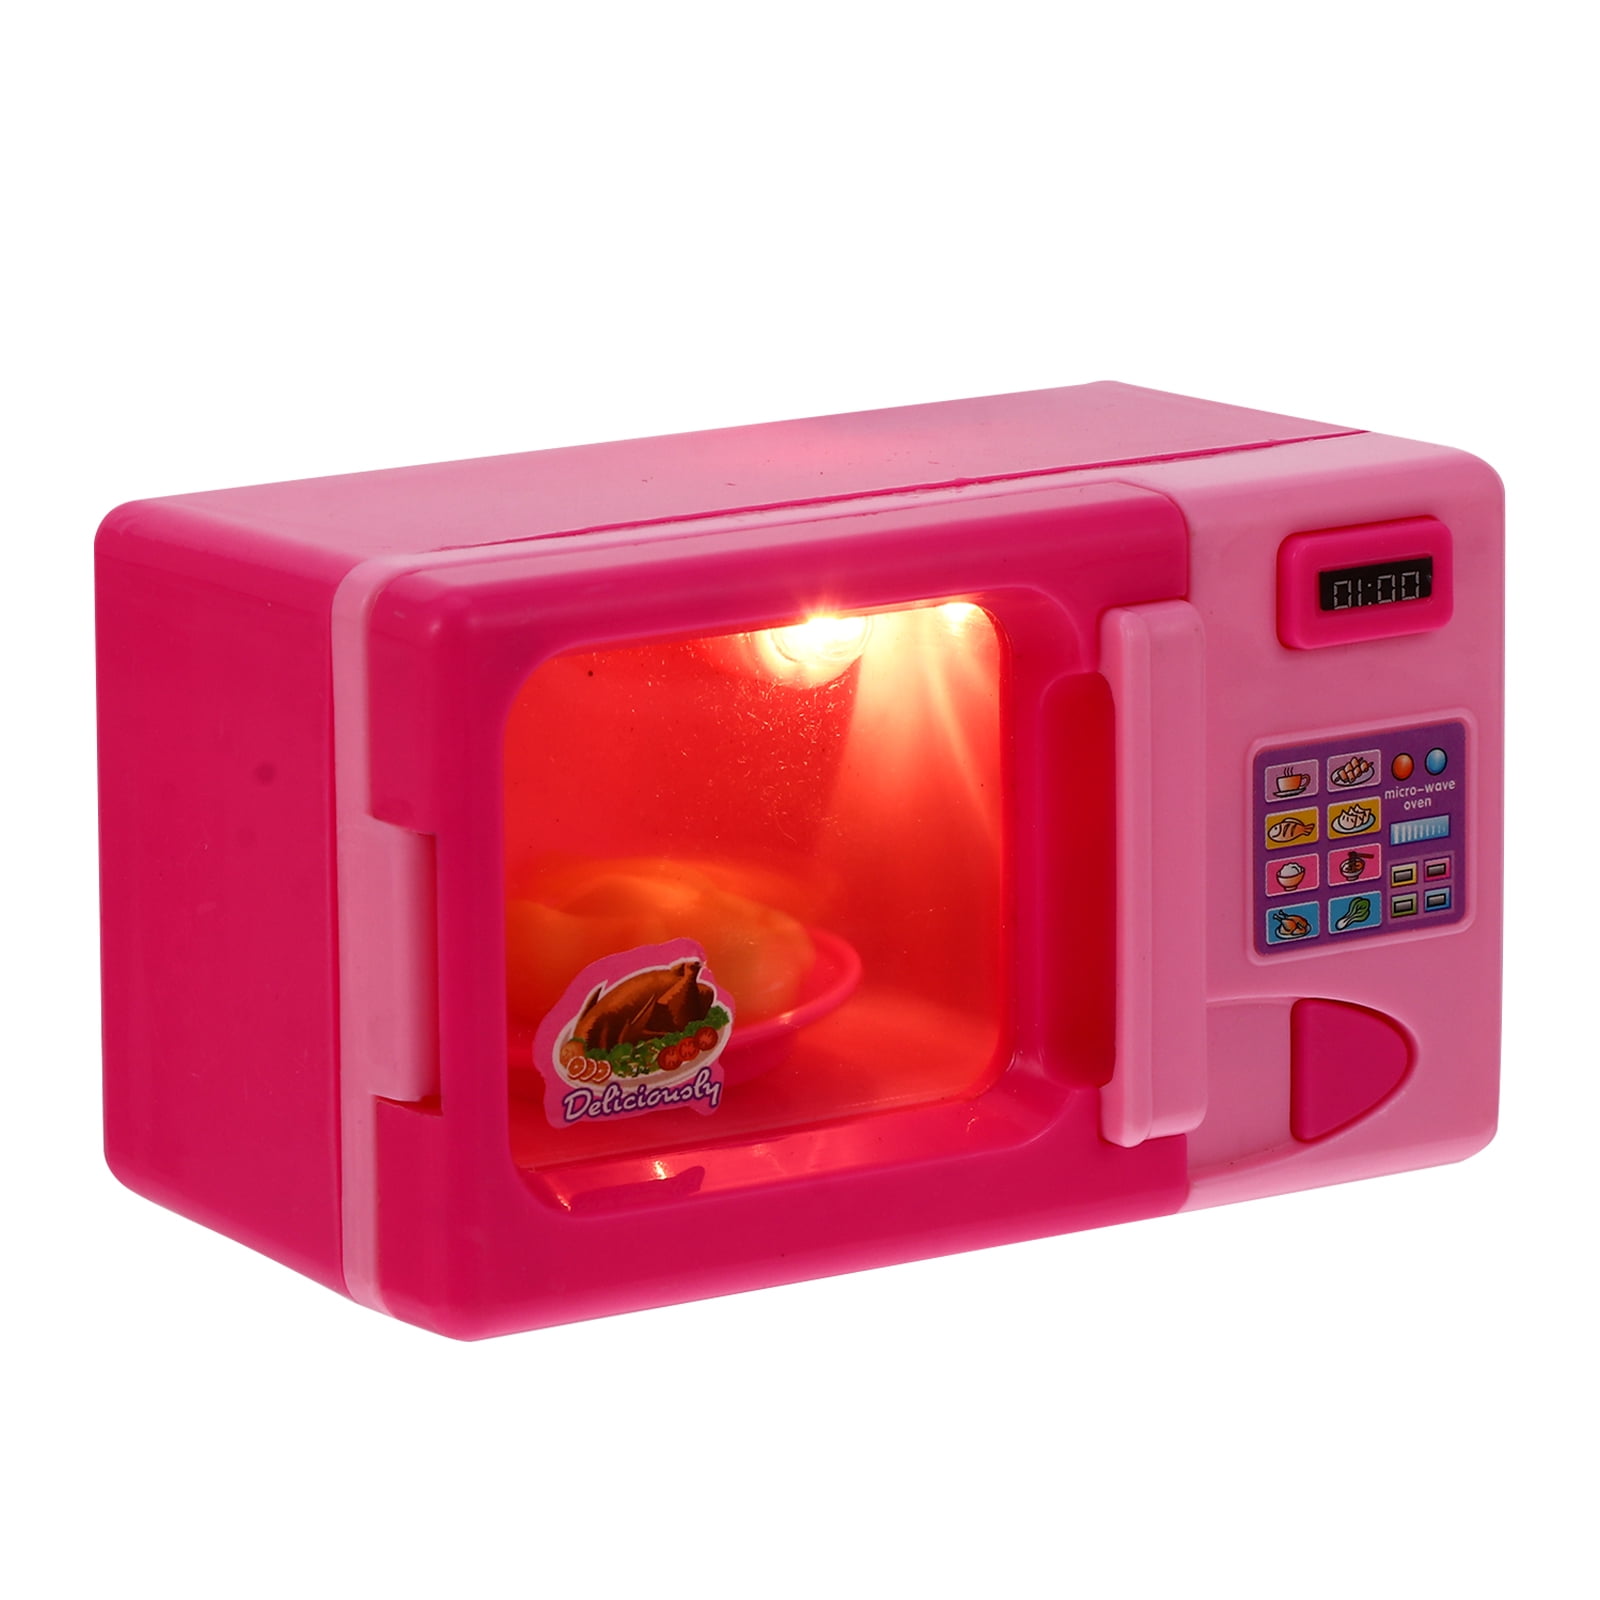 The way to brighten up any kitchen - a lovely bright pink microwave!!  £59.99